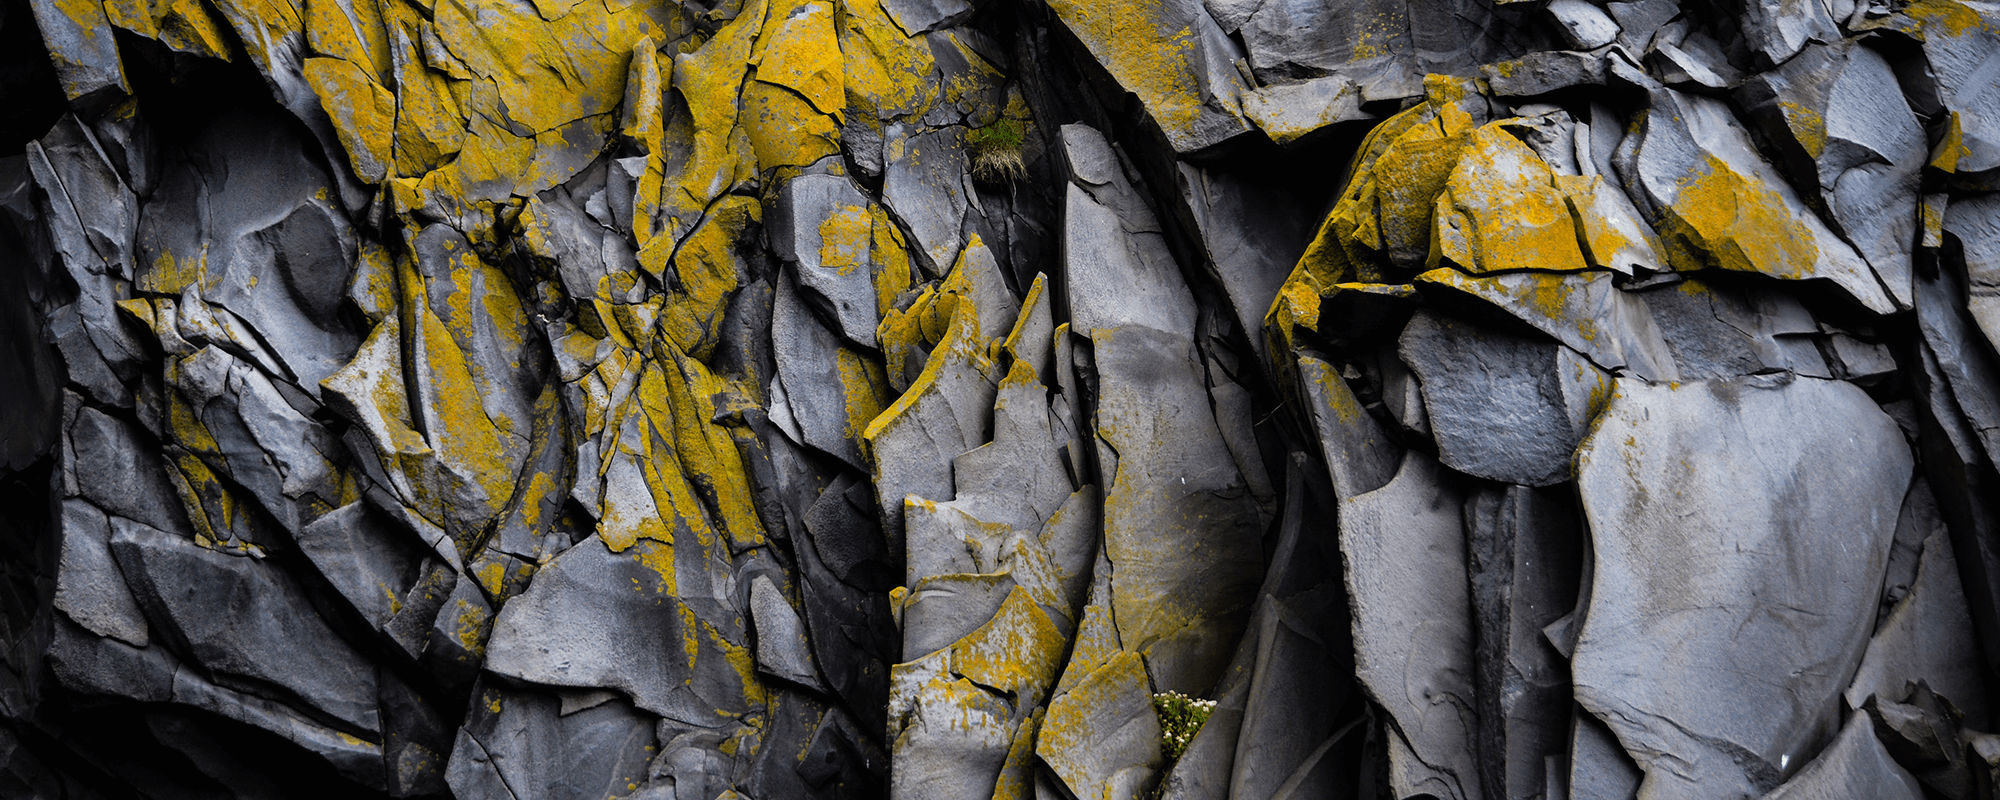 An image of layered rocks with a thin layer of yellow moss.